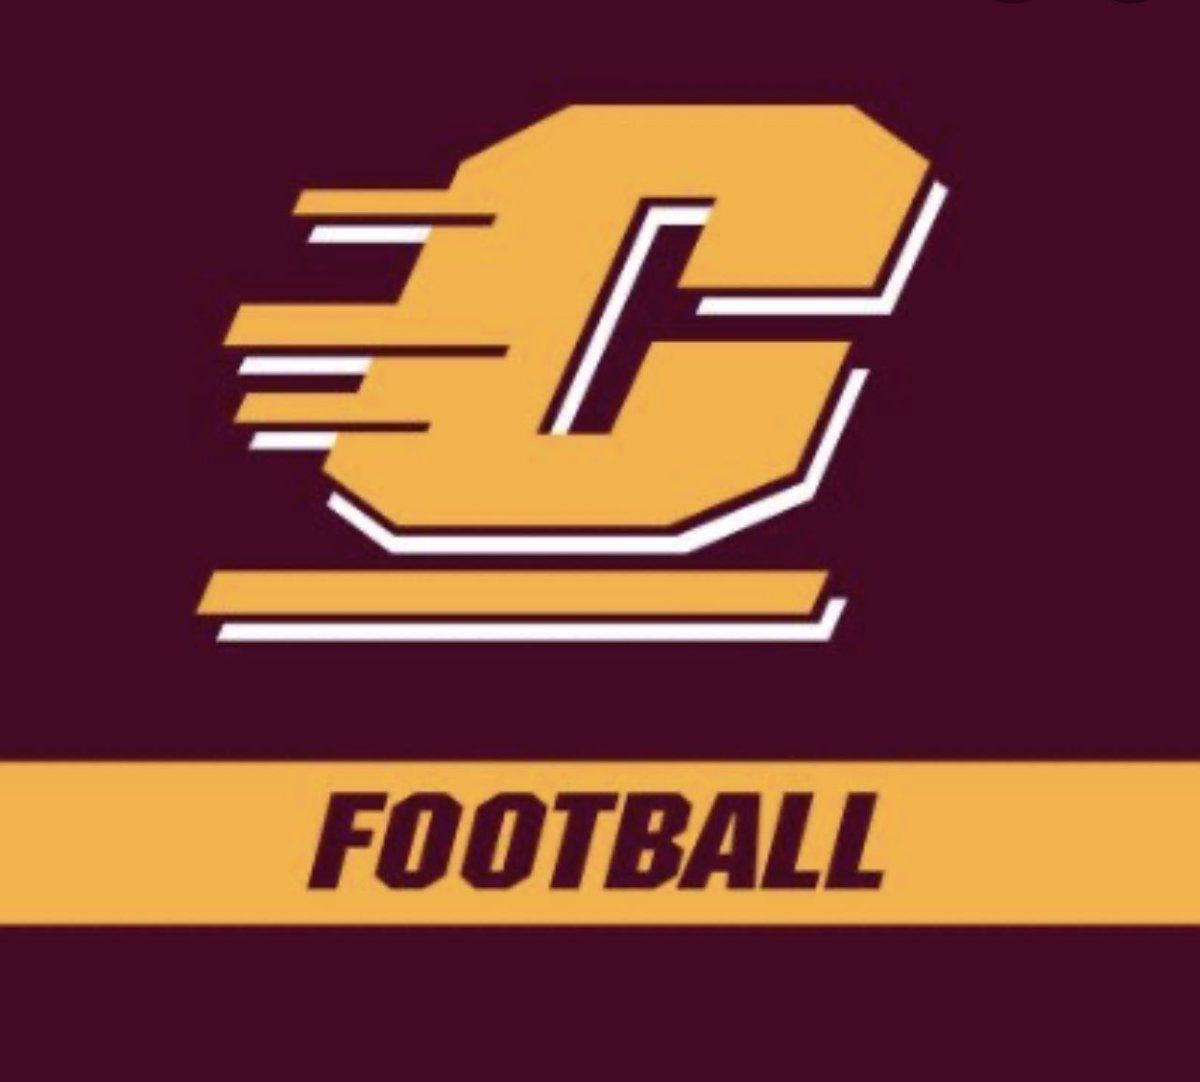 #AGTG Blessed to have EARNED my 5th division 1 offer from @CMU_Football ! Thank you @CoachMcElwain and the rest of the CMU coaching staff for this⭐️@CollegiateMb @MrNoOffseason @Coachditullio1 @BrianDohn247 @ShawnB_247 @alexgleitman @RivalsFriedman @AboutUOutreach #BetOnYourself